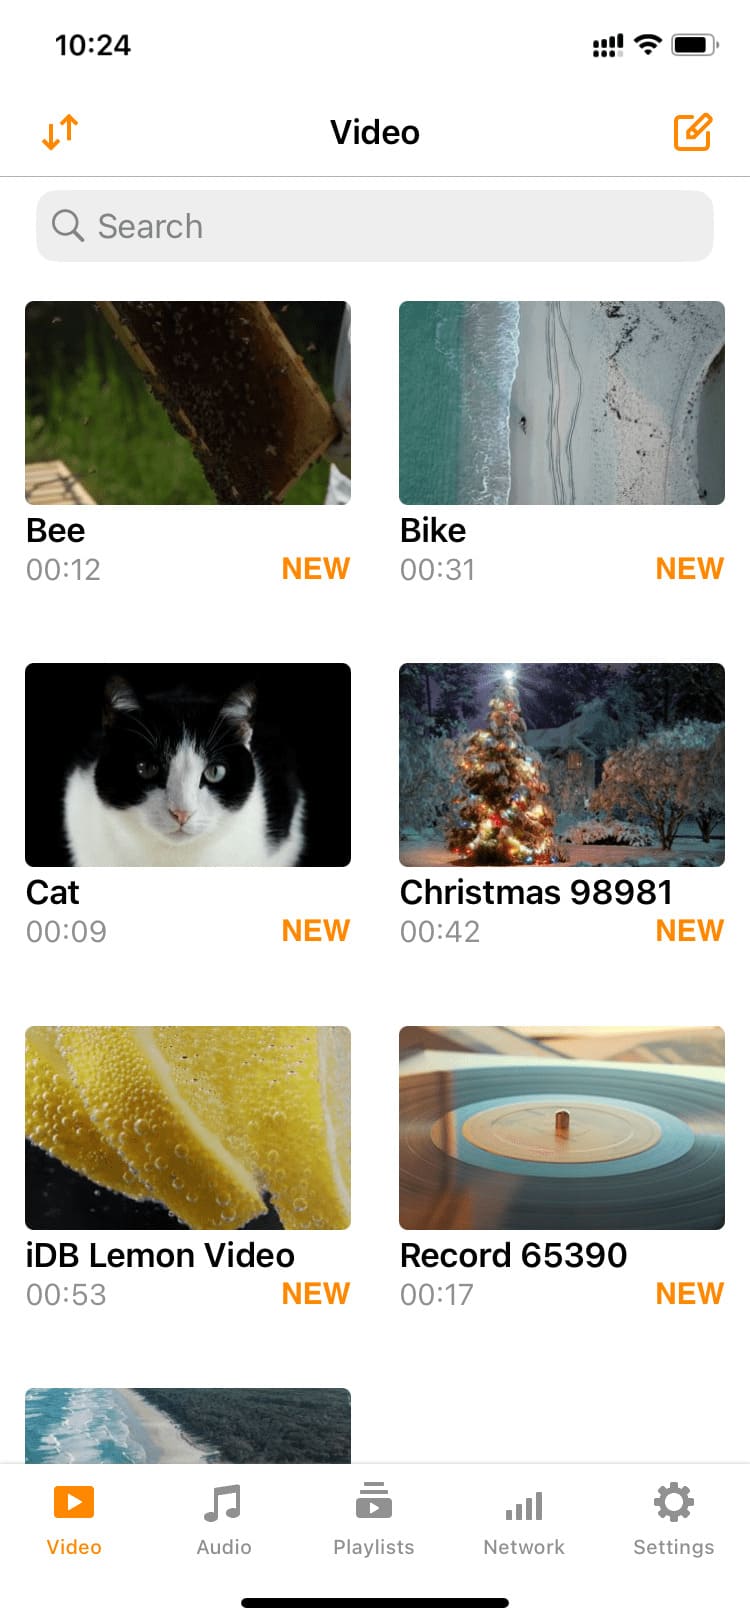 Video files inside the VLC app on iPhone